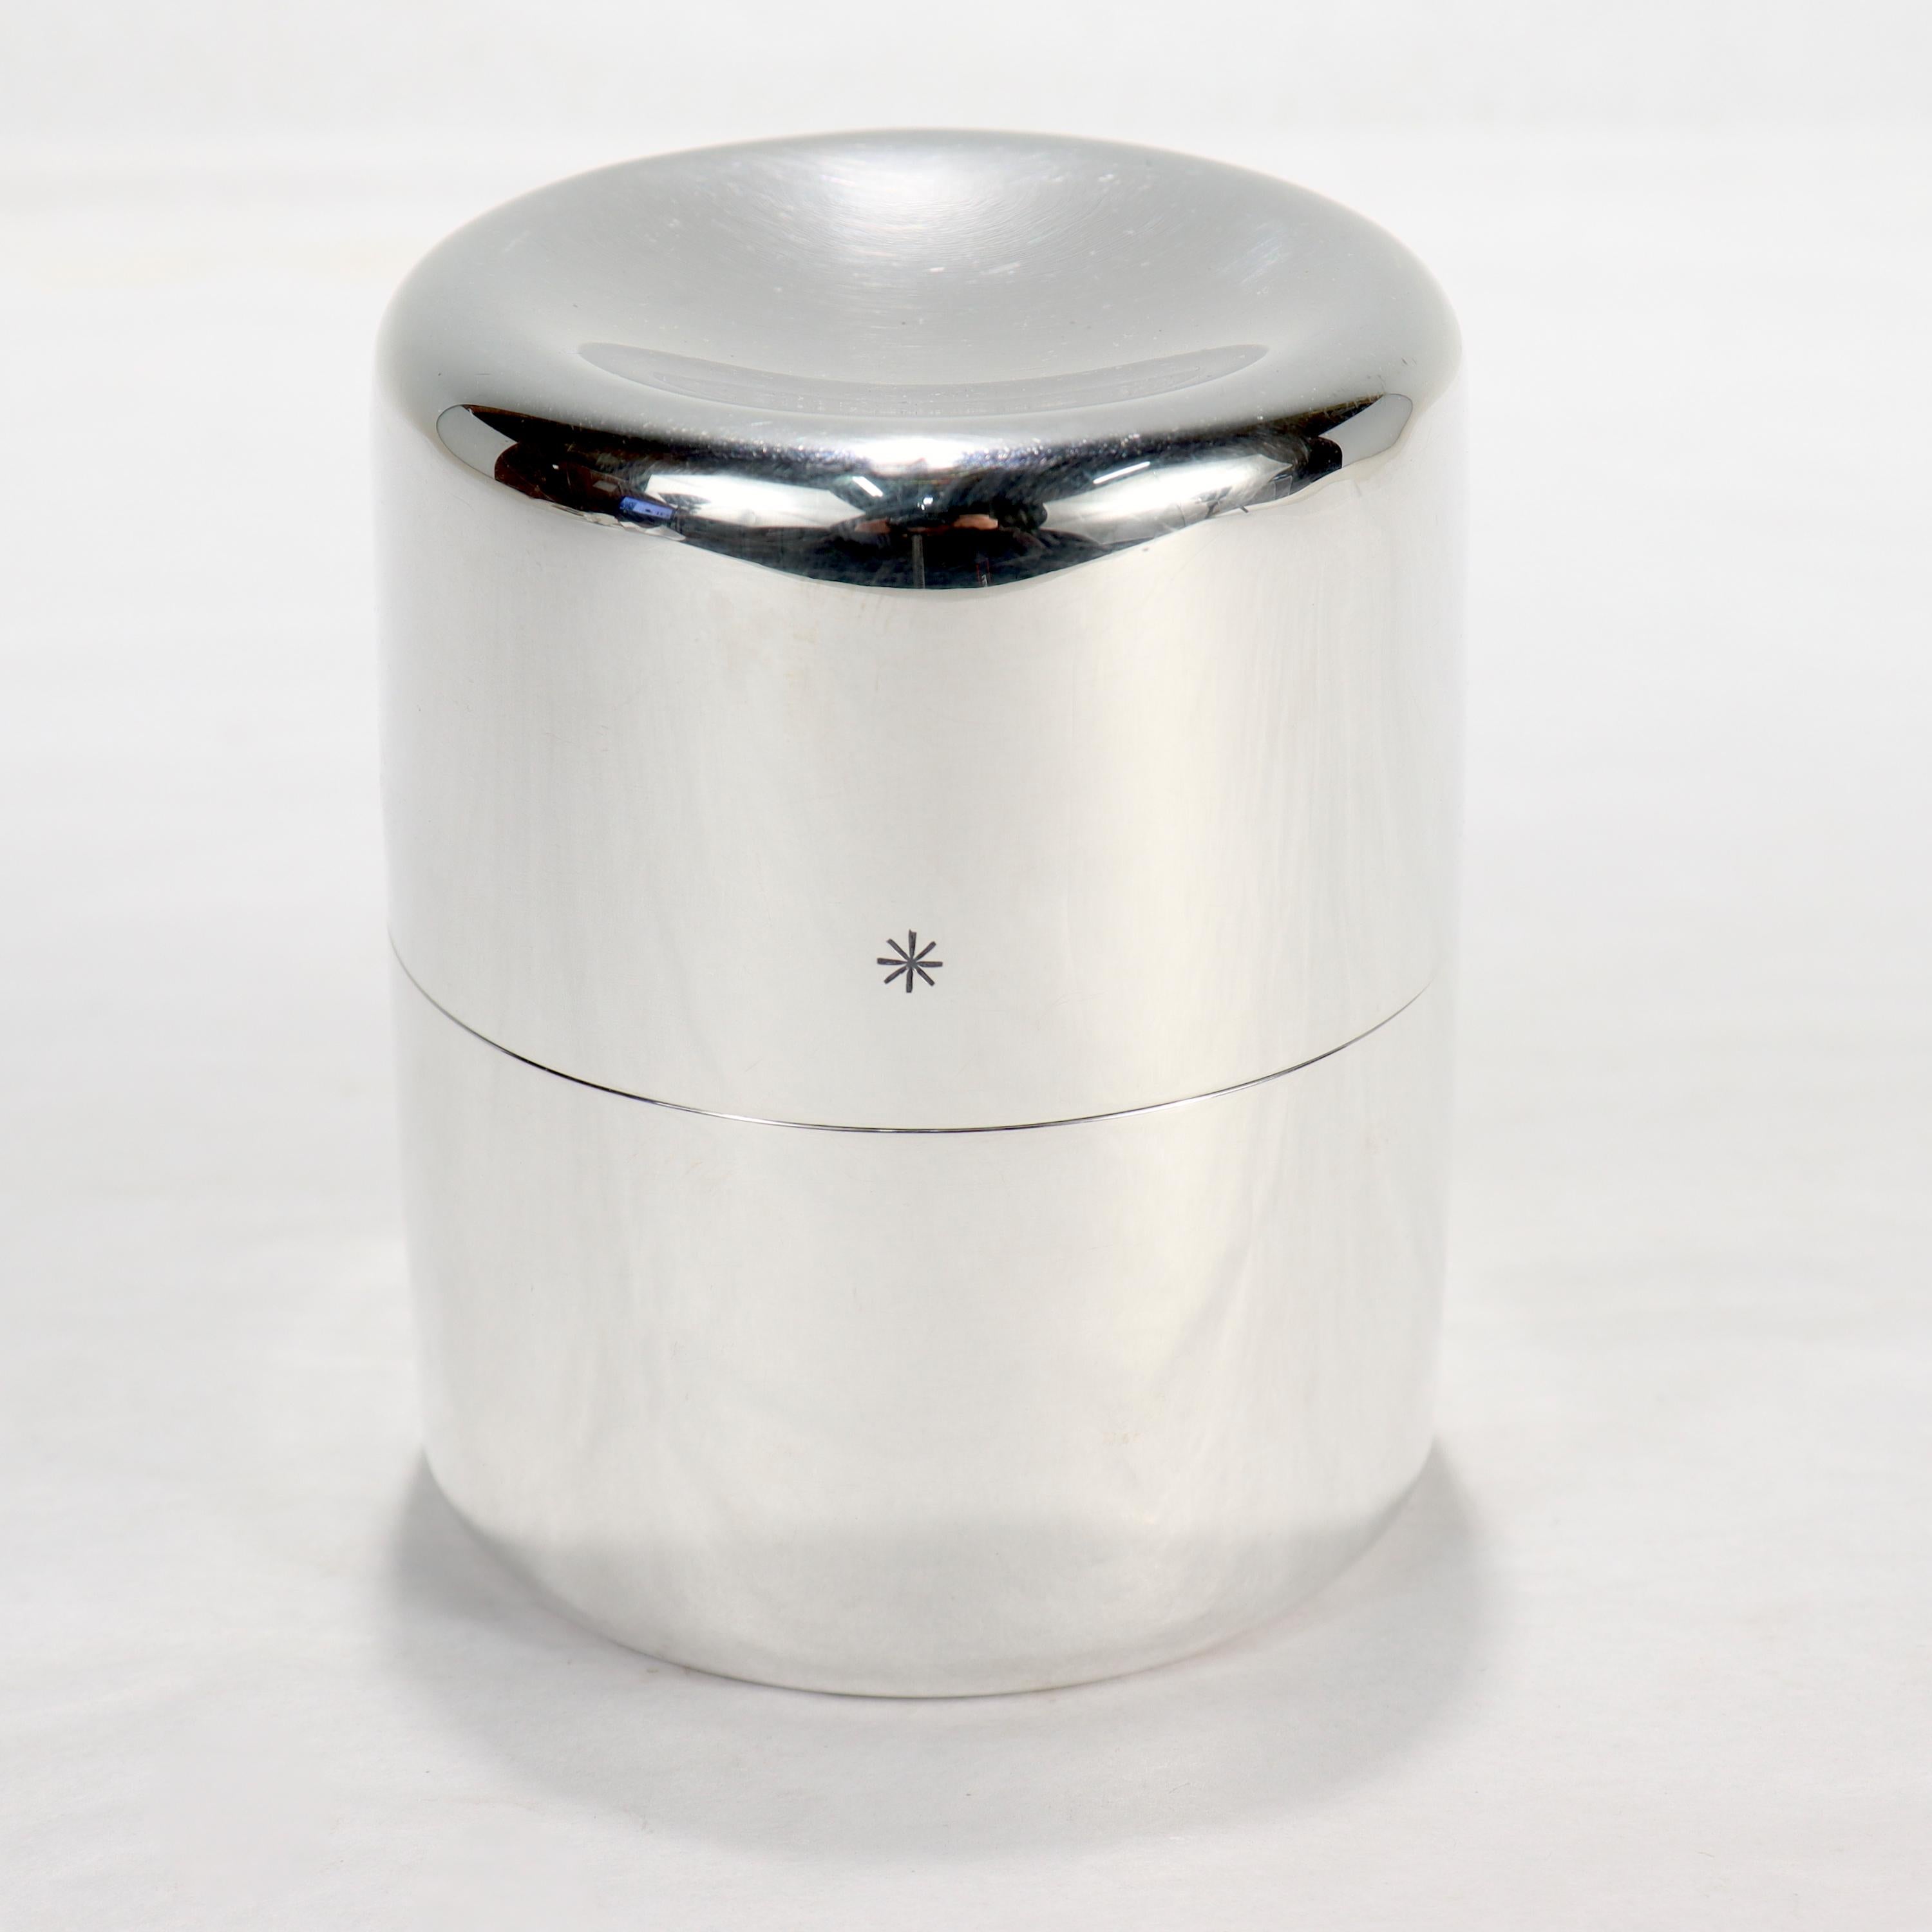 A fine Danish sterling silver tea caddy or covered box.

In sterling silver.

Designed by Ibi Trier Morch for Anton Michelsen.

With a recessed lid & base, sloped shoulders, equally proportioned top & bottom, and a star device engraved to the